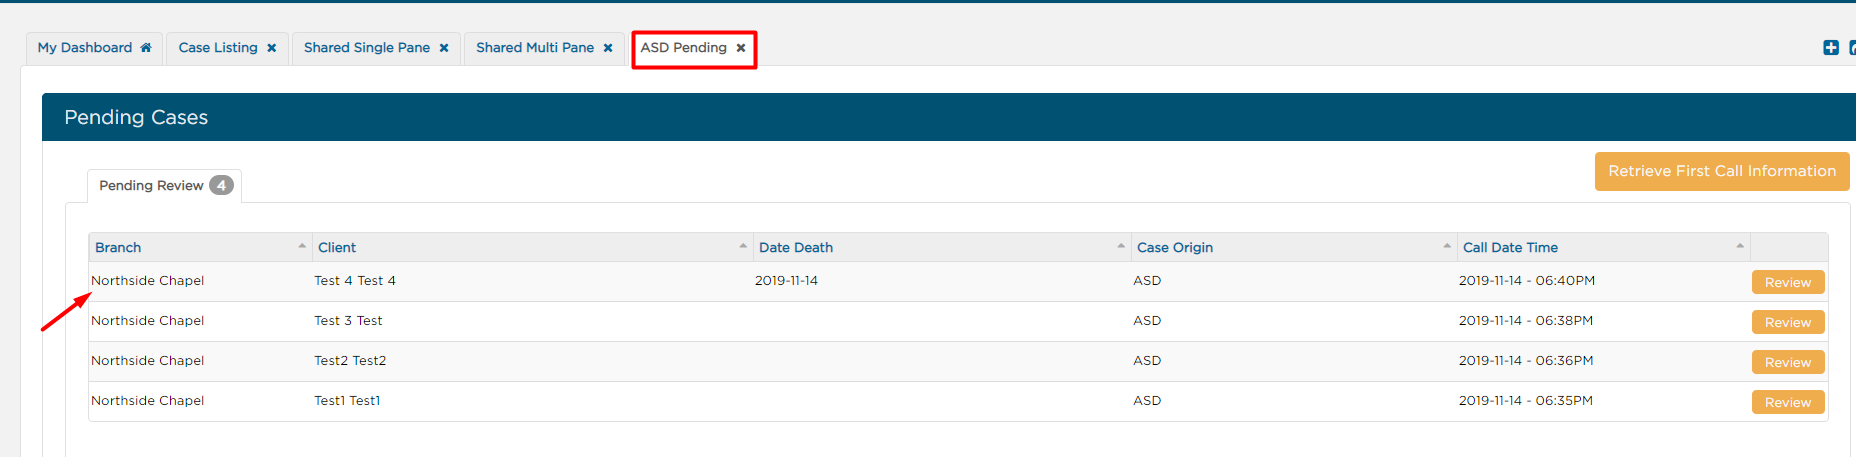 ASD Pending tab on Case Listing page